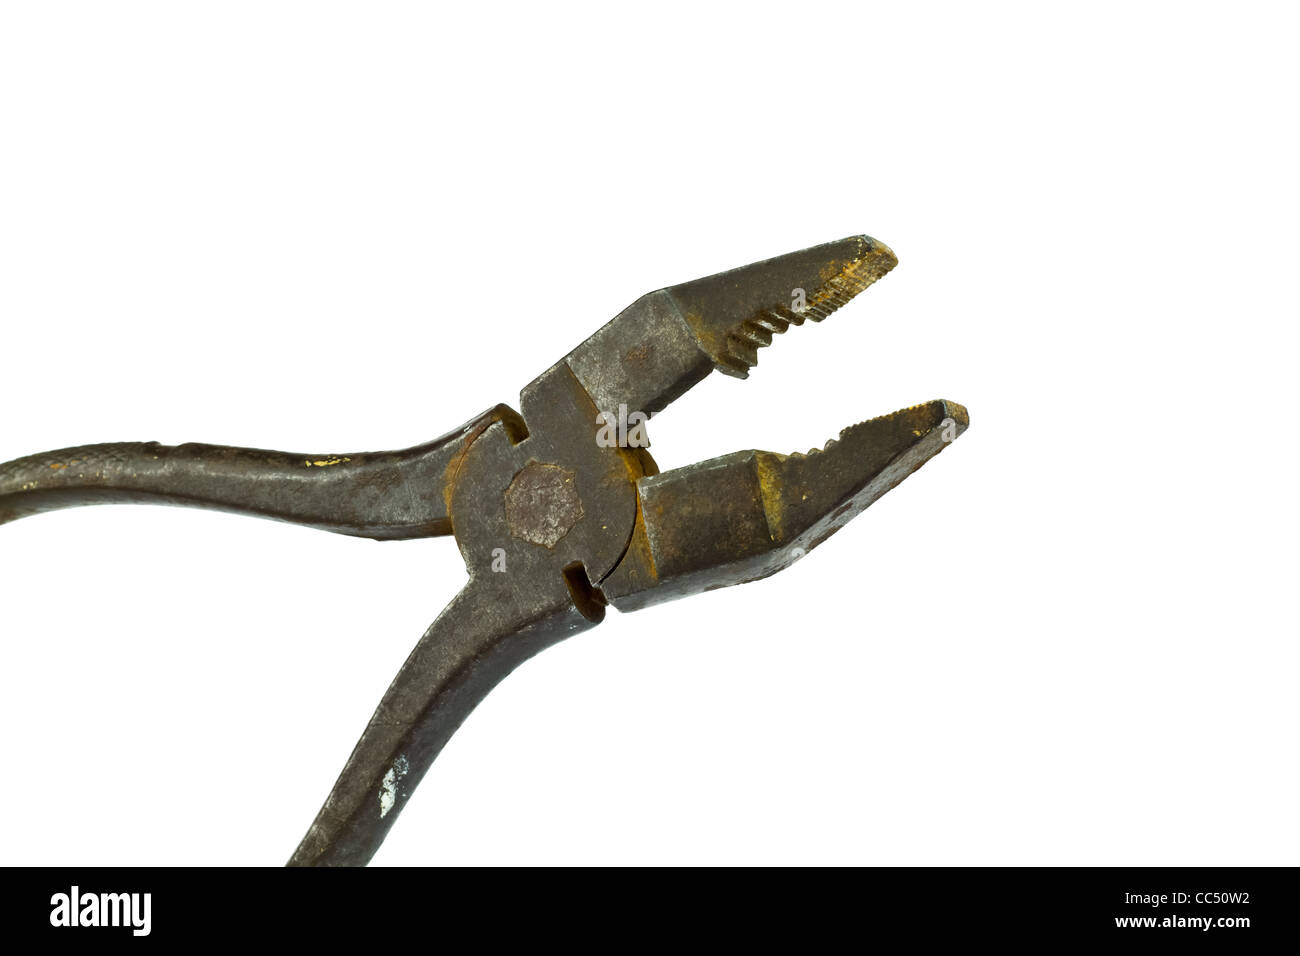 Tools that have past the test of time and still going. Rusty old pliers. Stock Photo